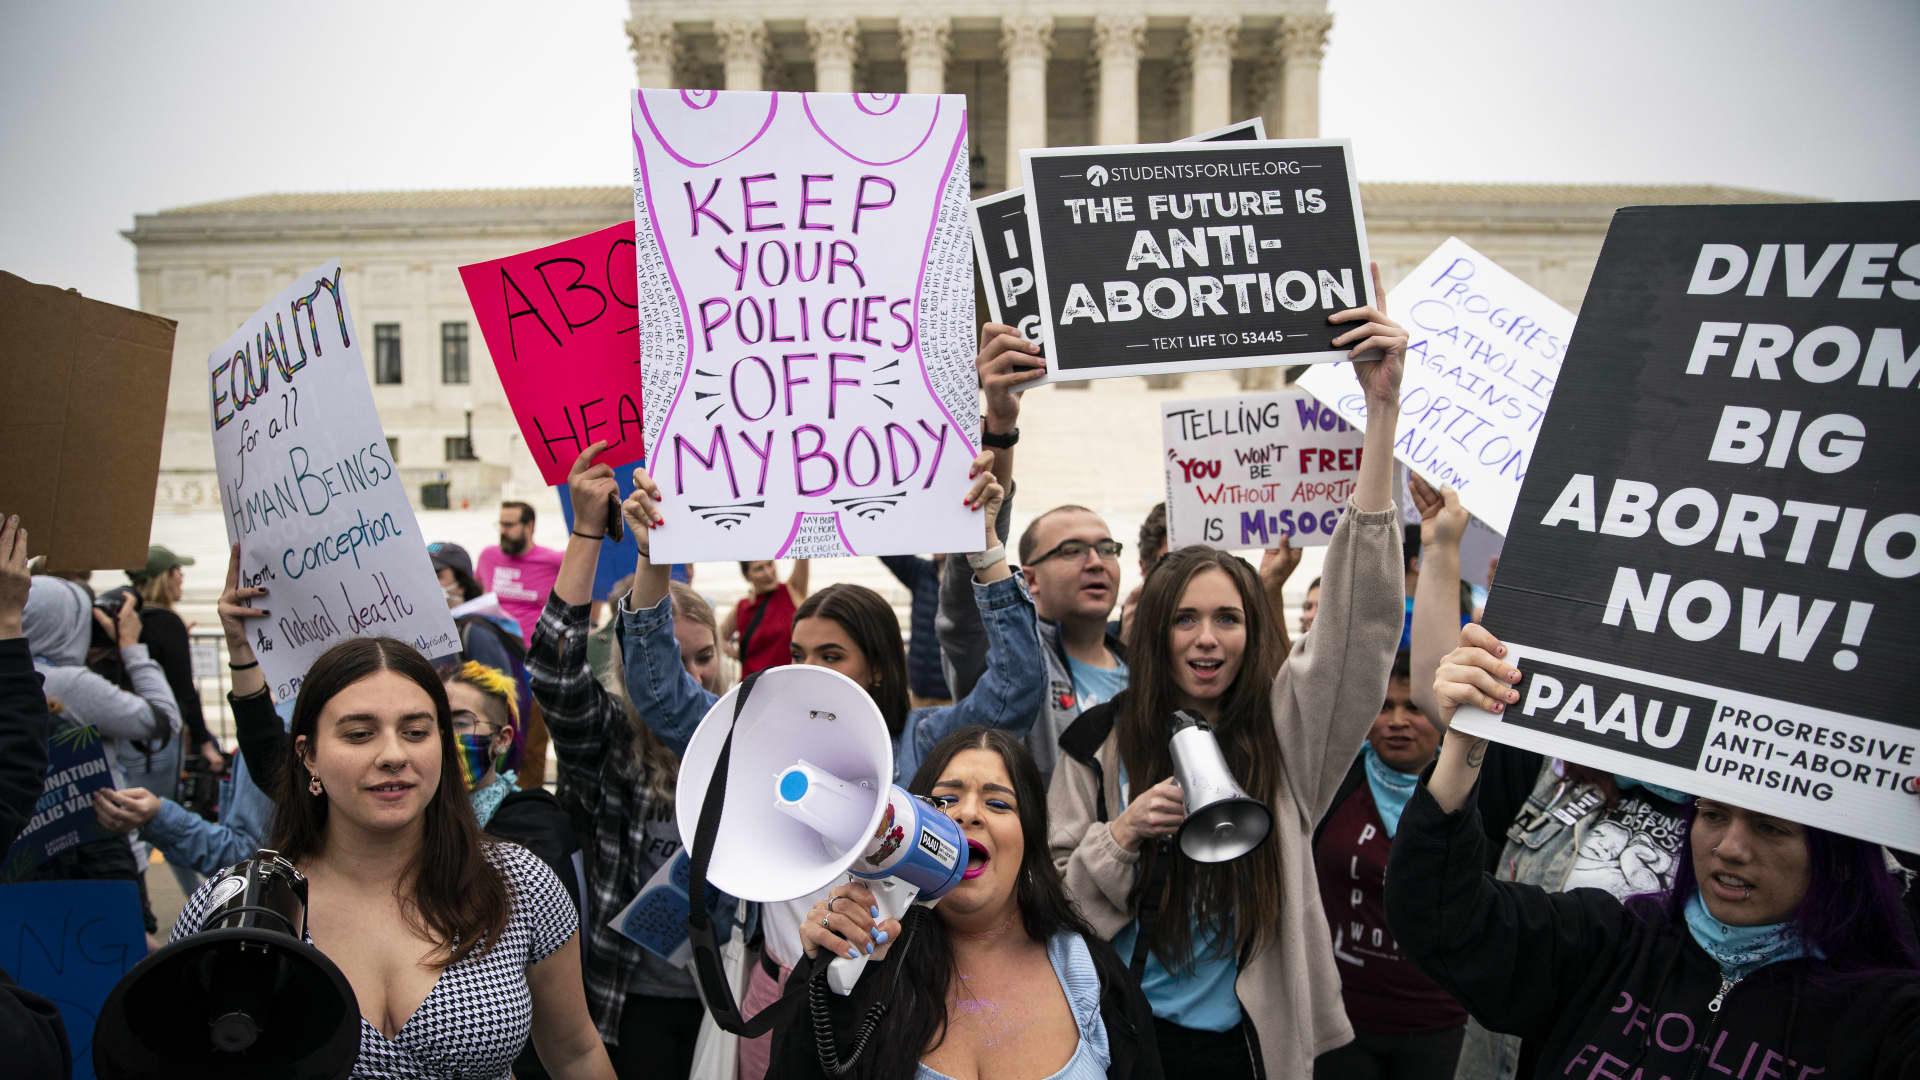 Supreme Court ruling undoing Roe abortion case would spark state bans